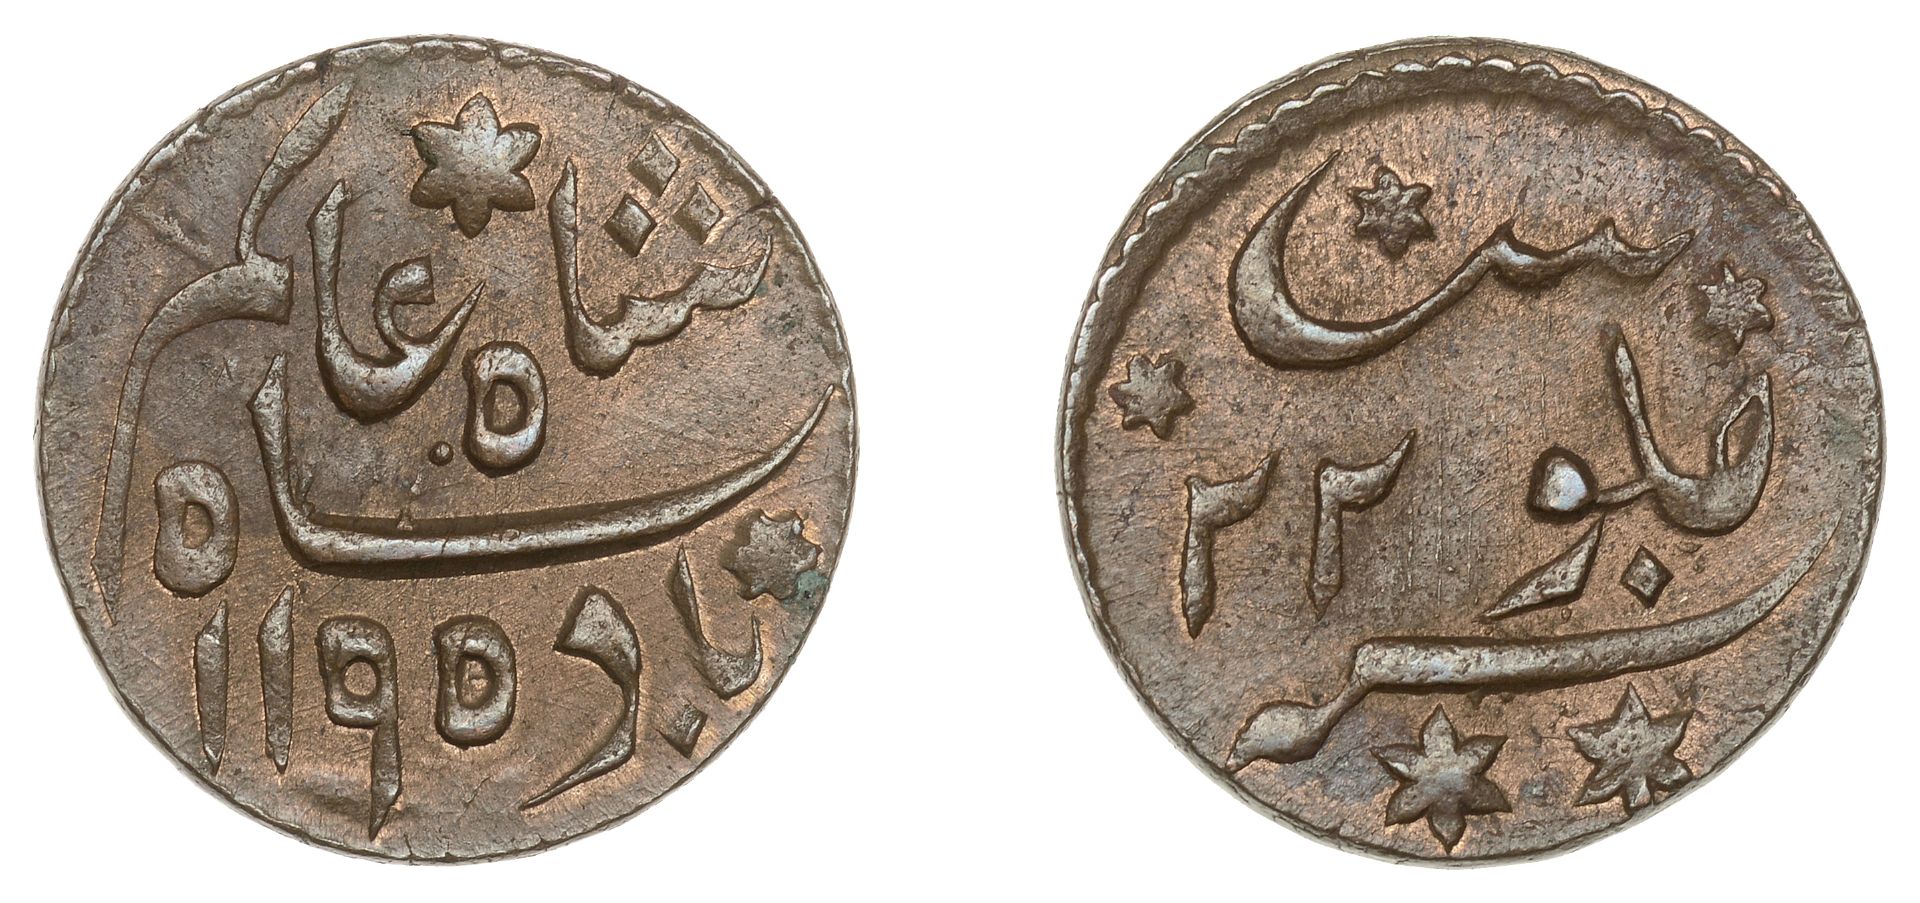 East India Company, Bengal Presidency, Pulta mint: Prinsep's coinage, copper Fulus or Quarte...